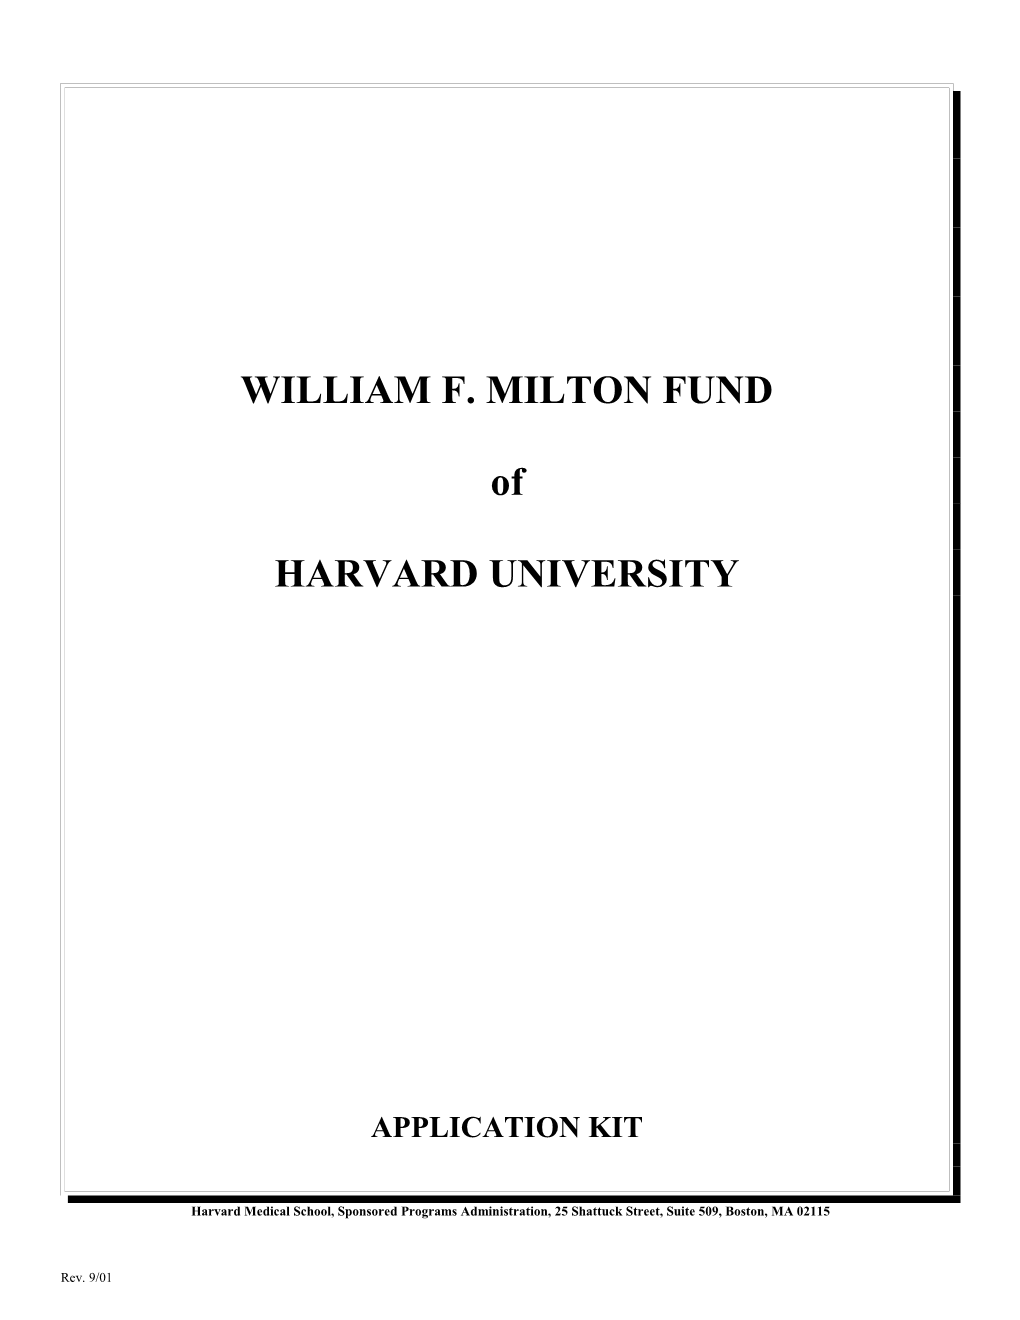 Application for Support from the William F. Milton Fund